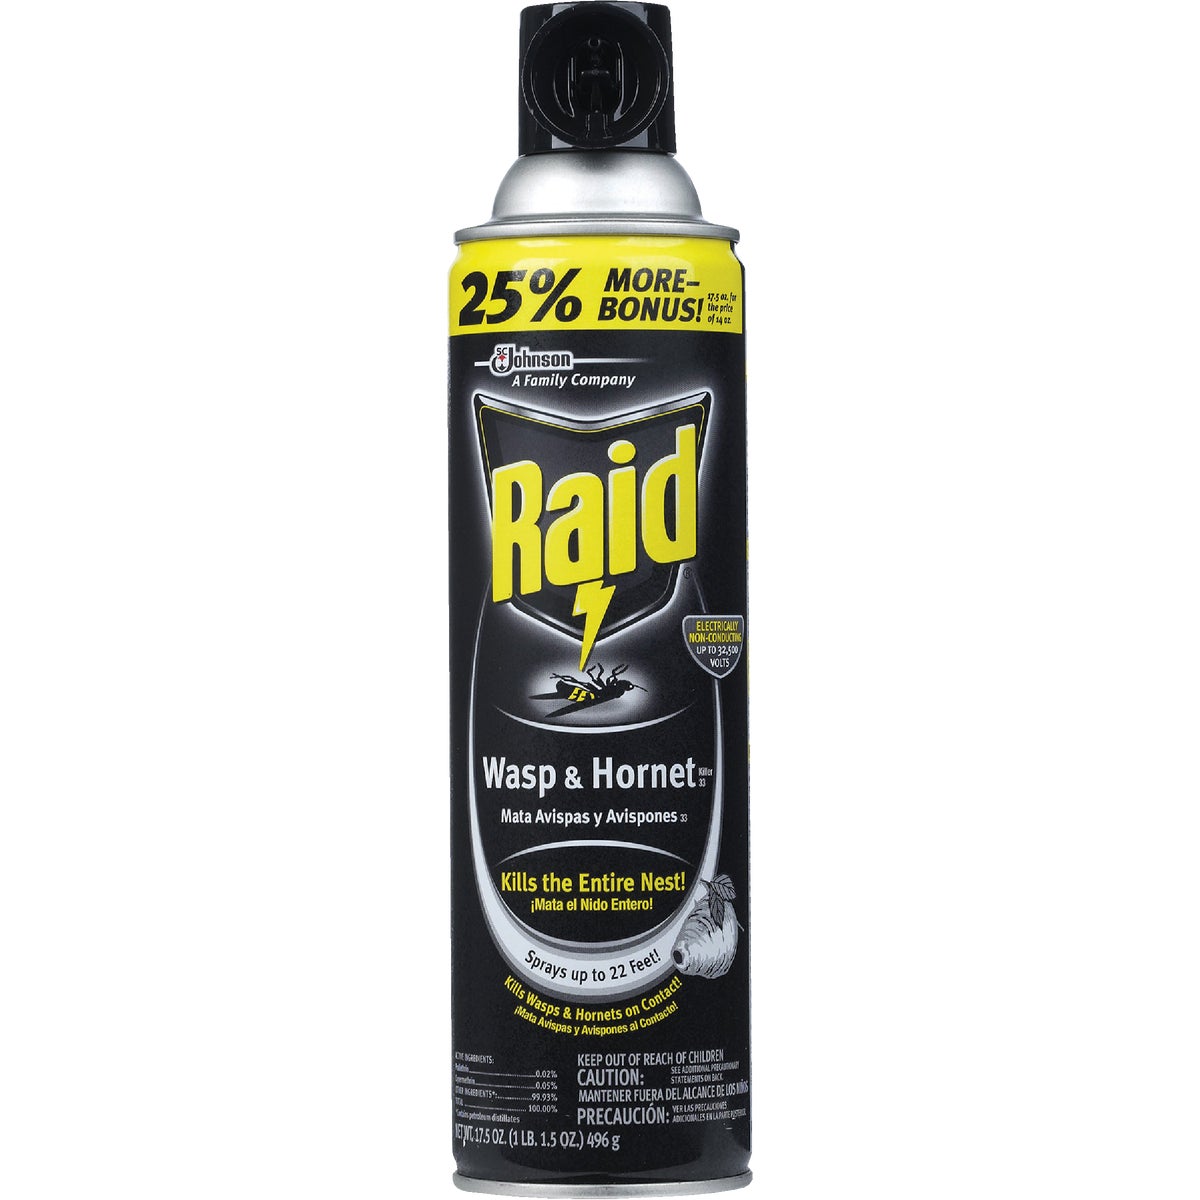 Item 756328, Raid wasp and hornet killer sprays up to 22 feet to kill wasps, hornets, 